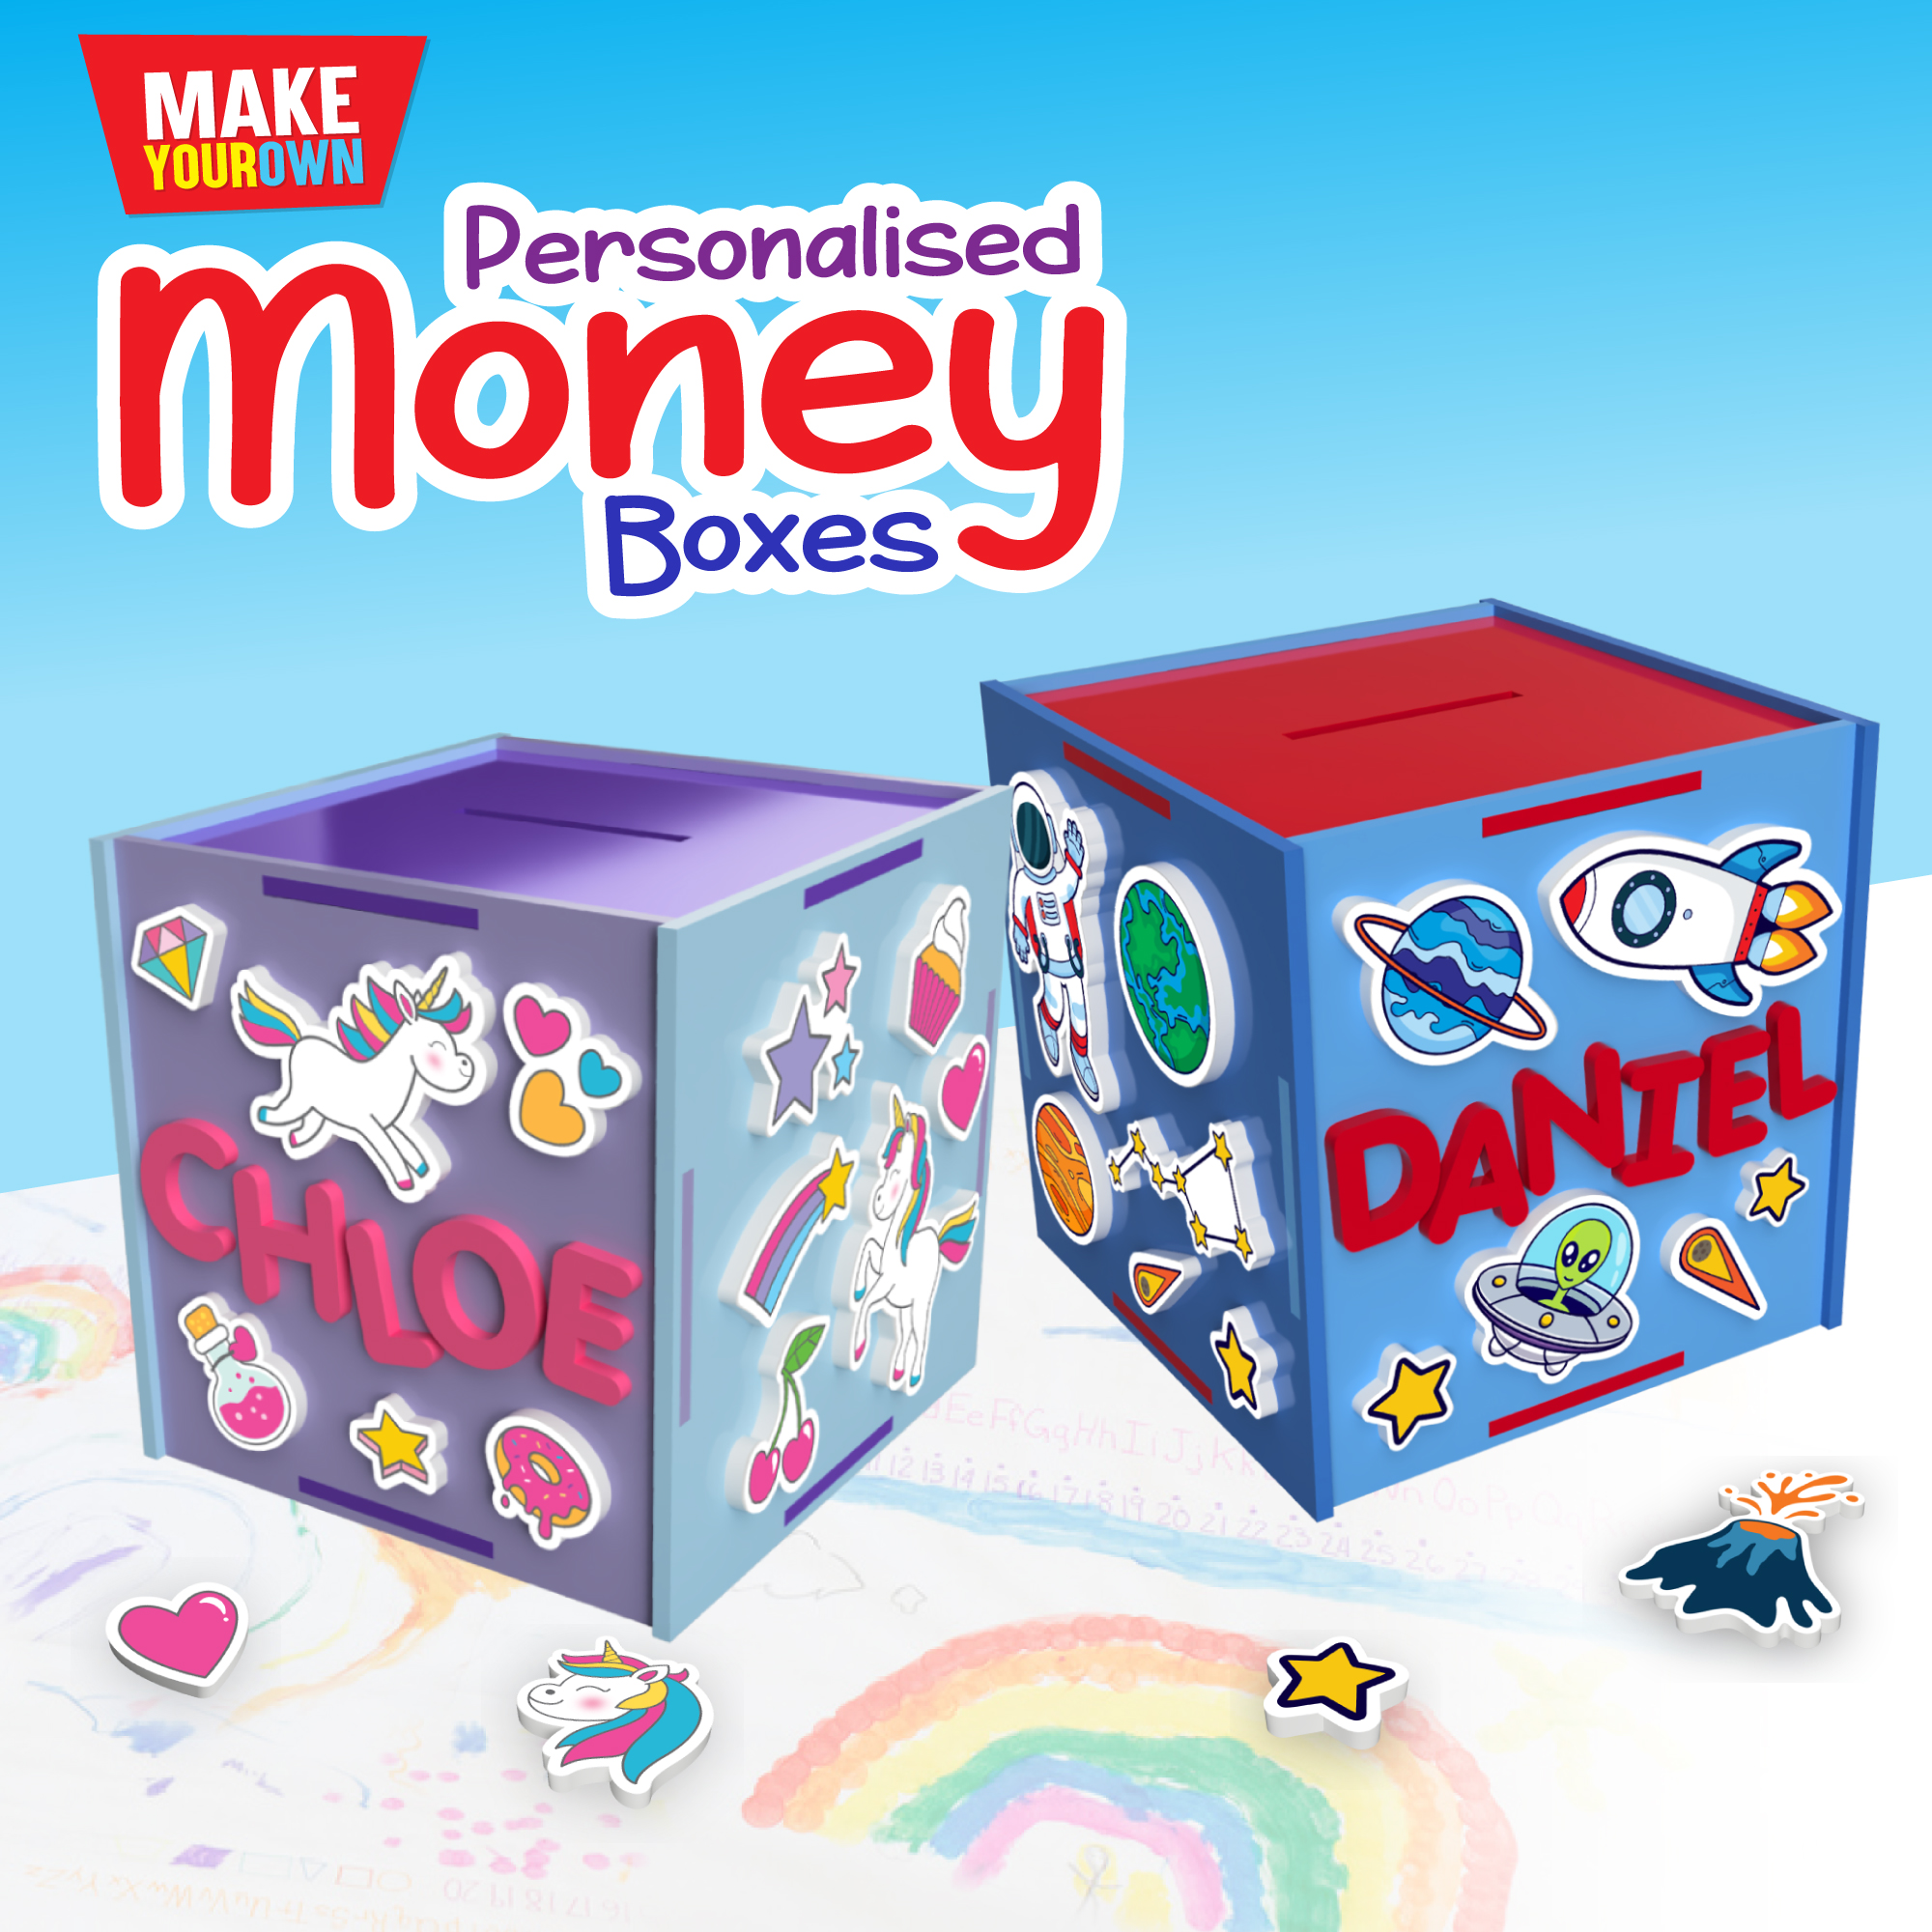 Make your own personalised money boxes from global journey